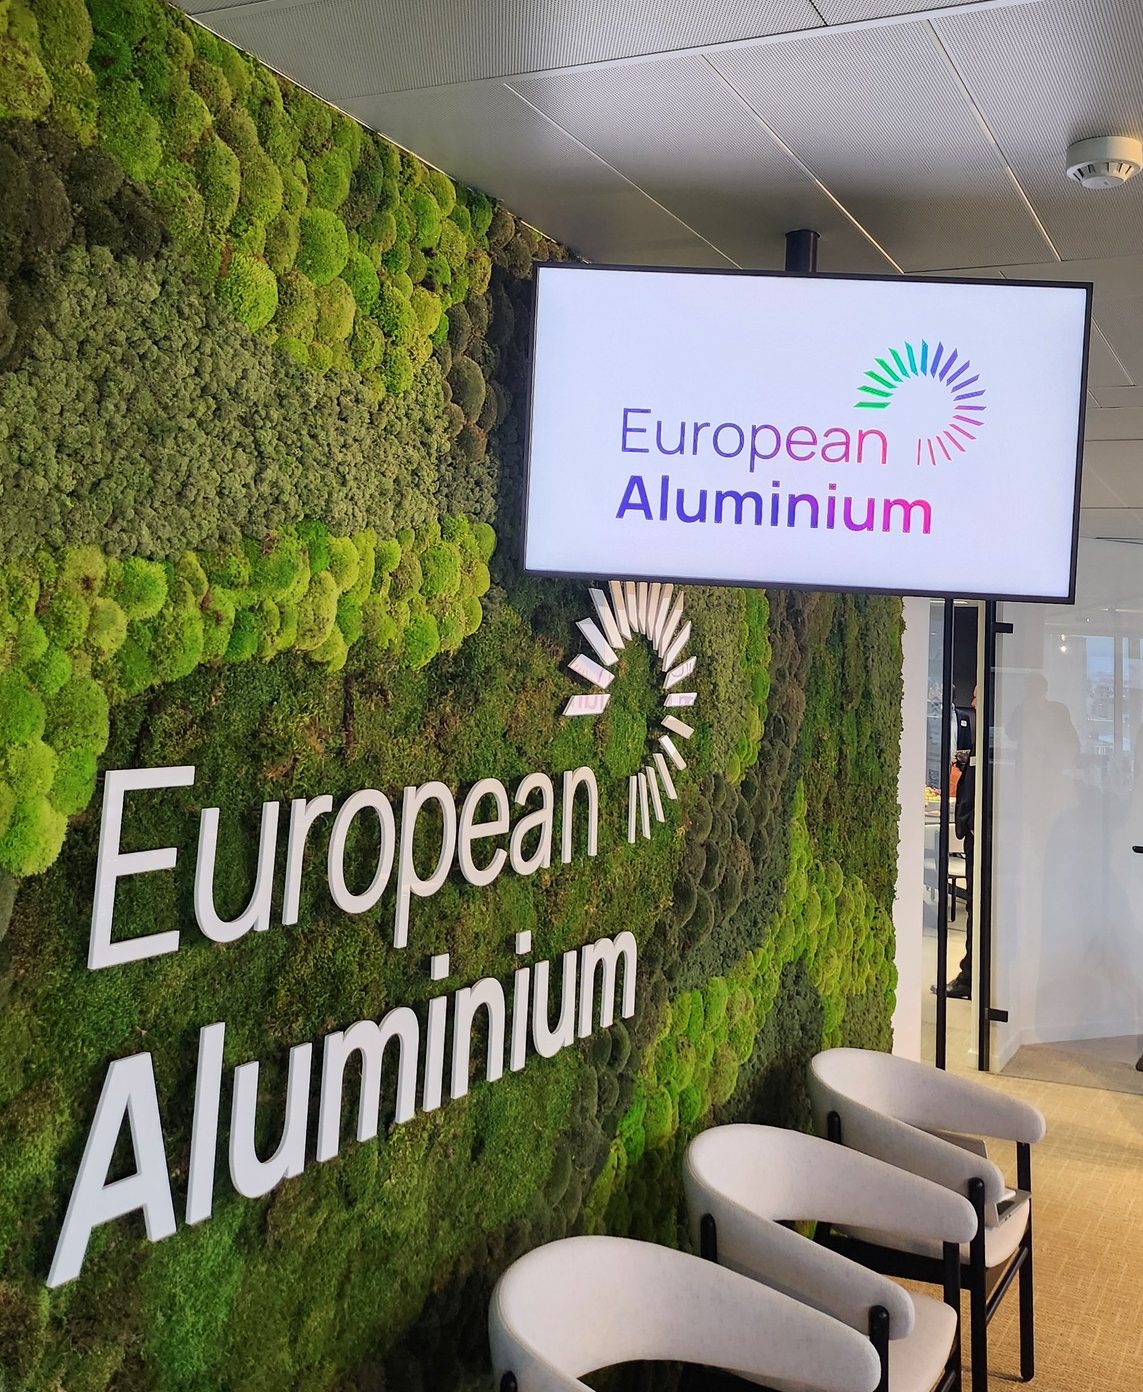 We call on European Commission and the European Council to put full embargo on Russian aluminium